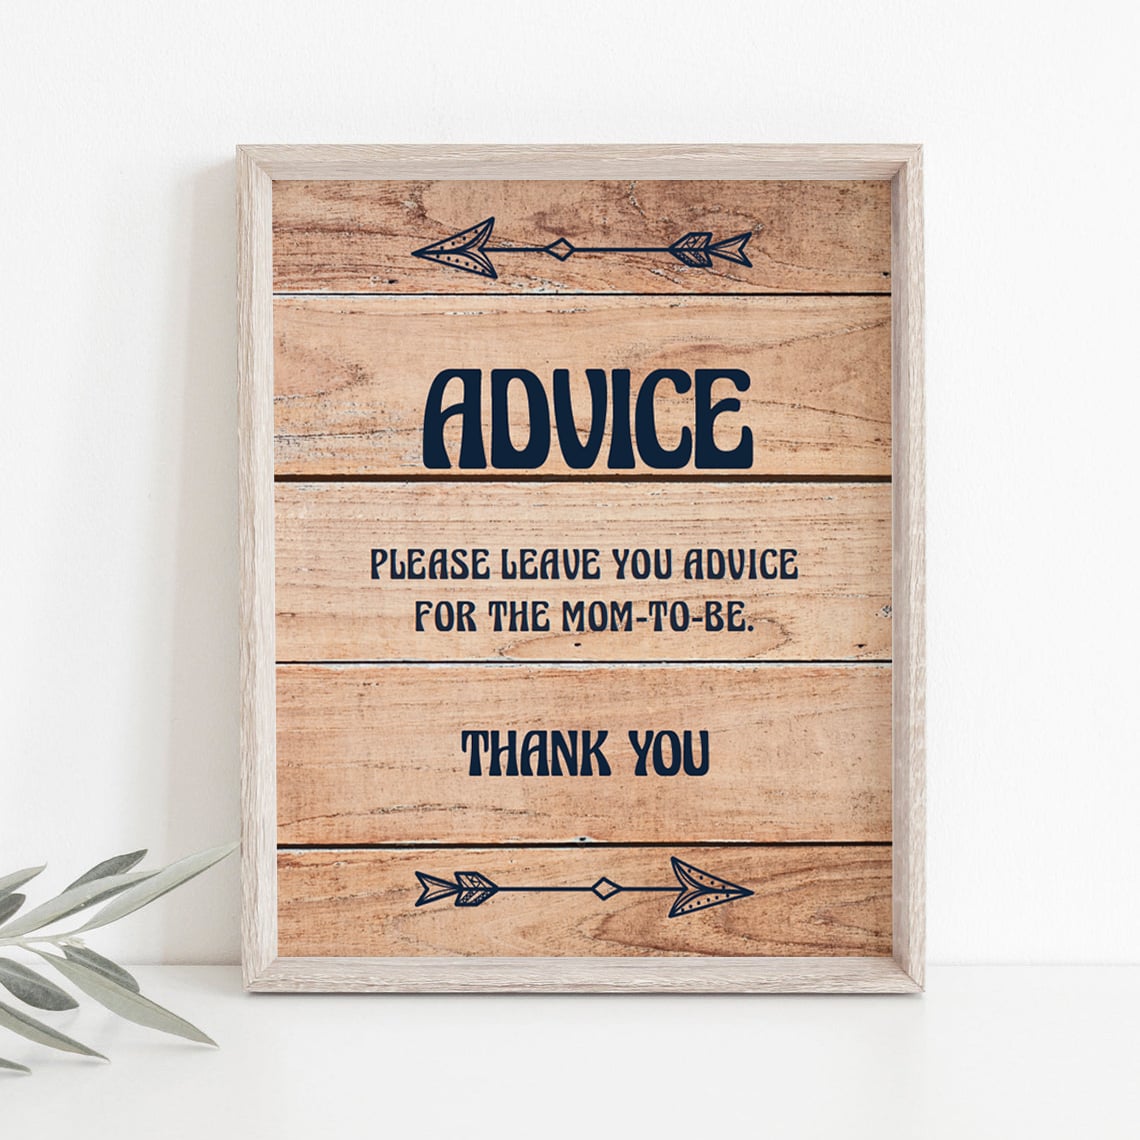 Adventures shower advice sign template by LittleSizzle